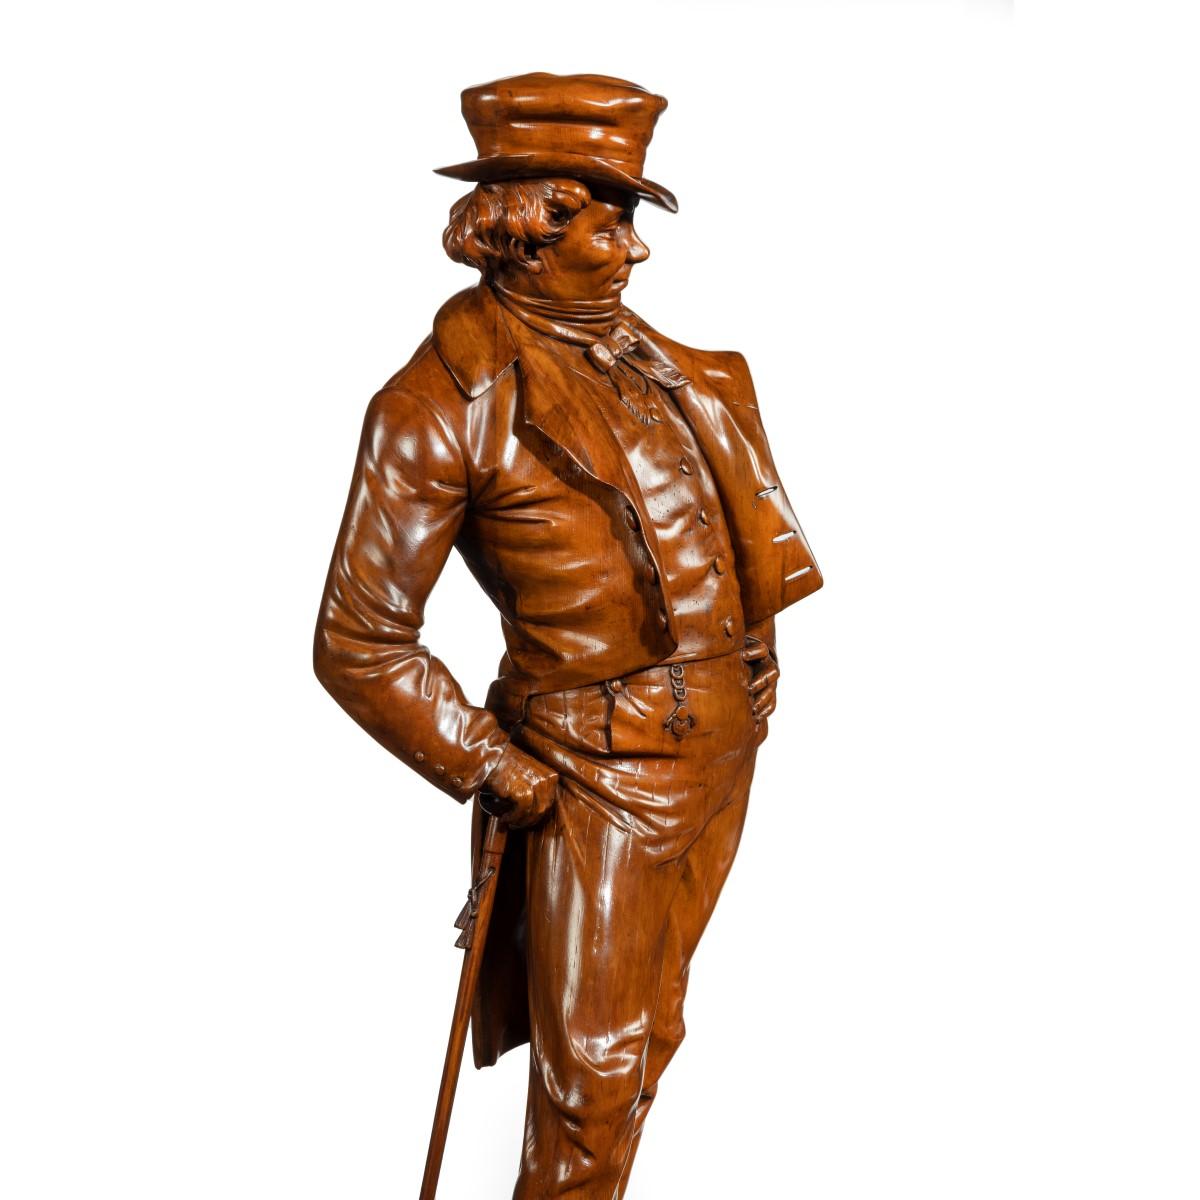 A Victorian carved walnut figure of Mark Tapley from the novel ‘The Life and Adventures of Martin Chuzzlewit’ by Charles Dickens’, wearing a soft top hat, a tailcoat and a buttoned waistcoat, striking a nonchalant pose with one hand on his hip,